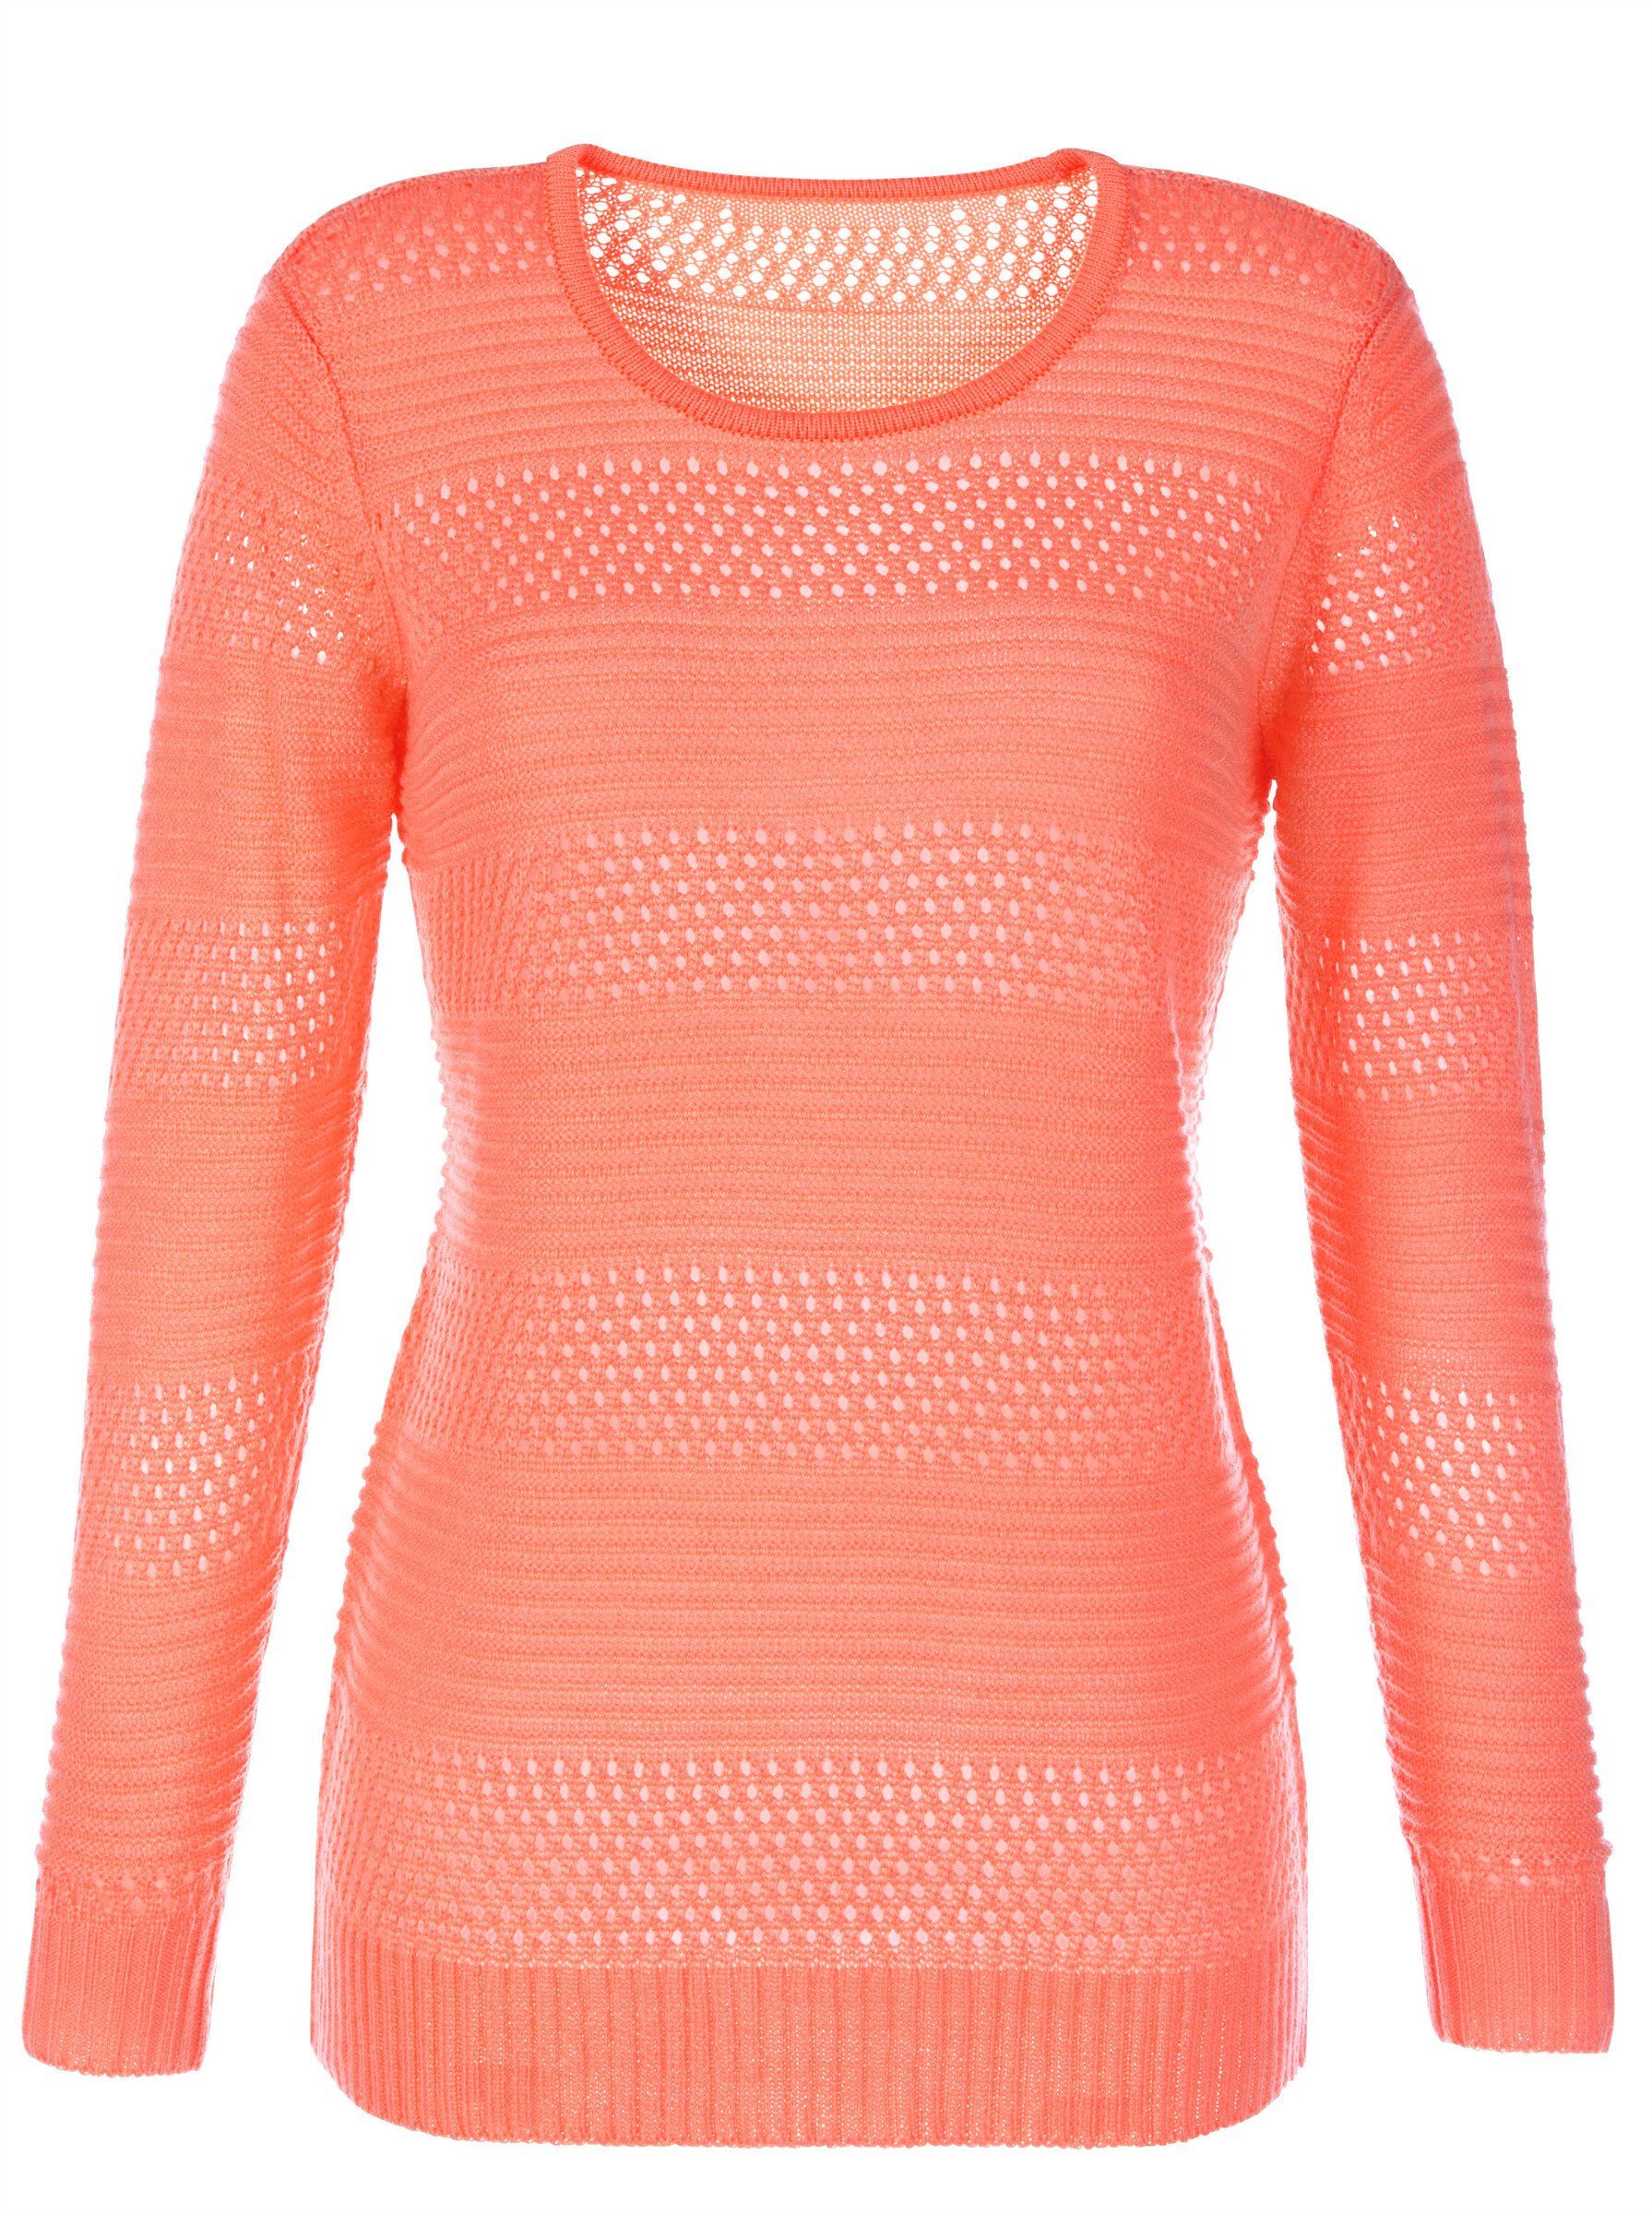 Sieh an! apricot Strickpullover